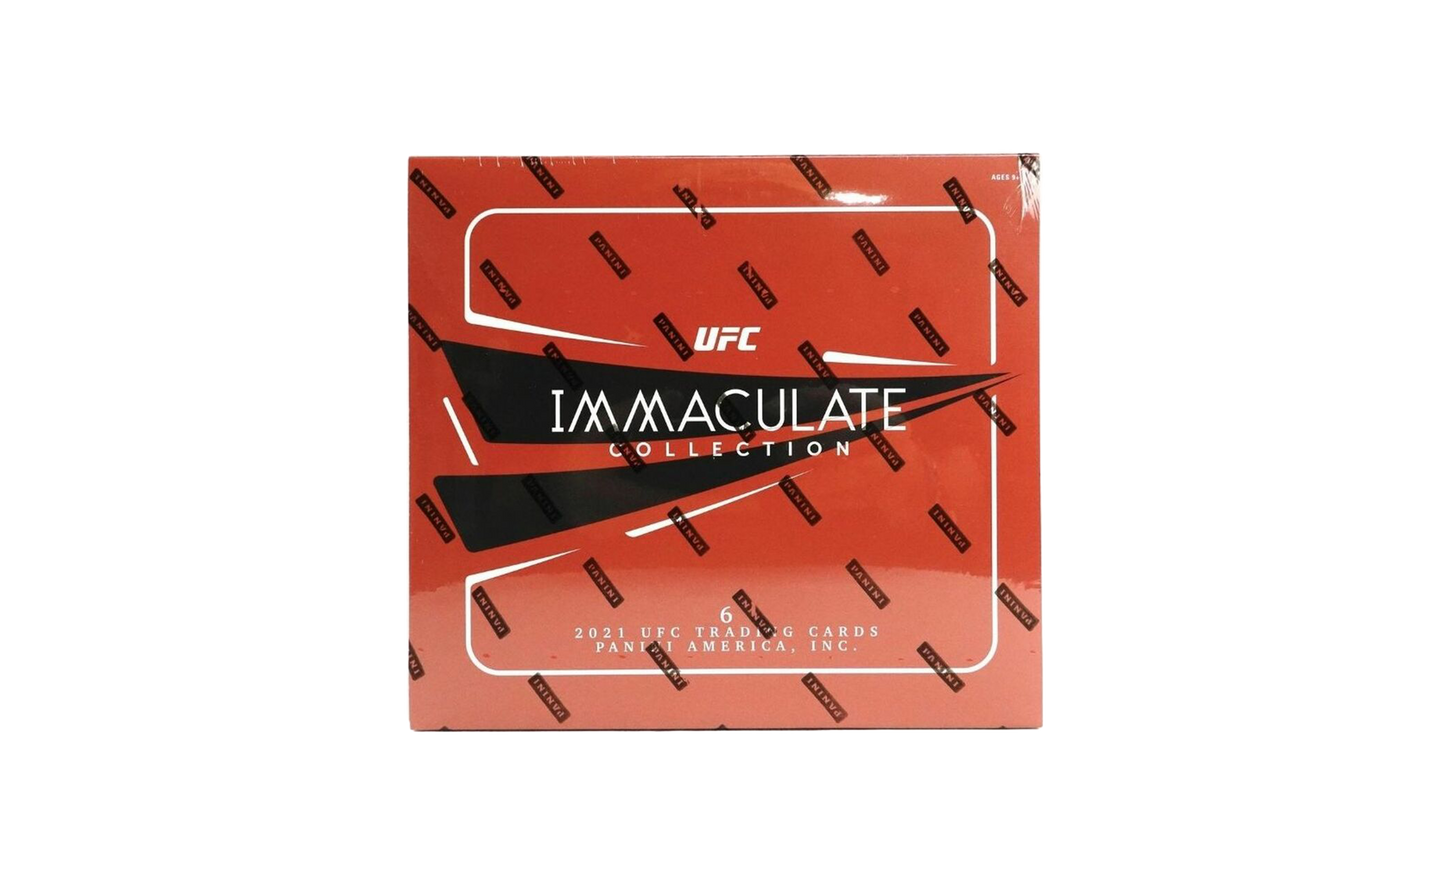 UFC IMMACULATE HOBBY